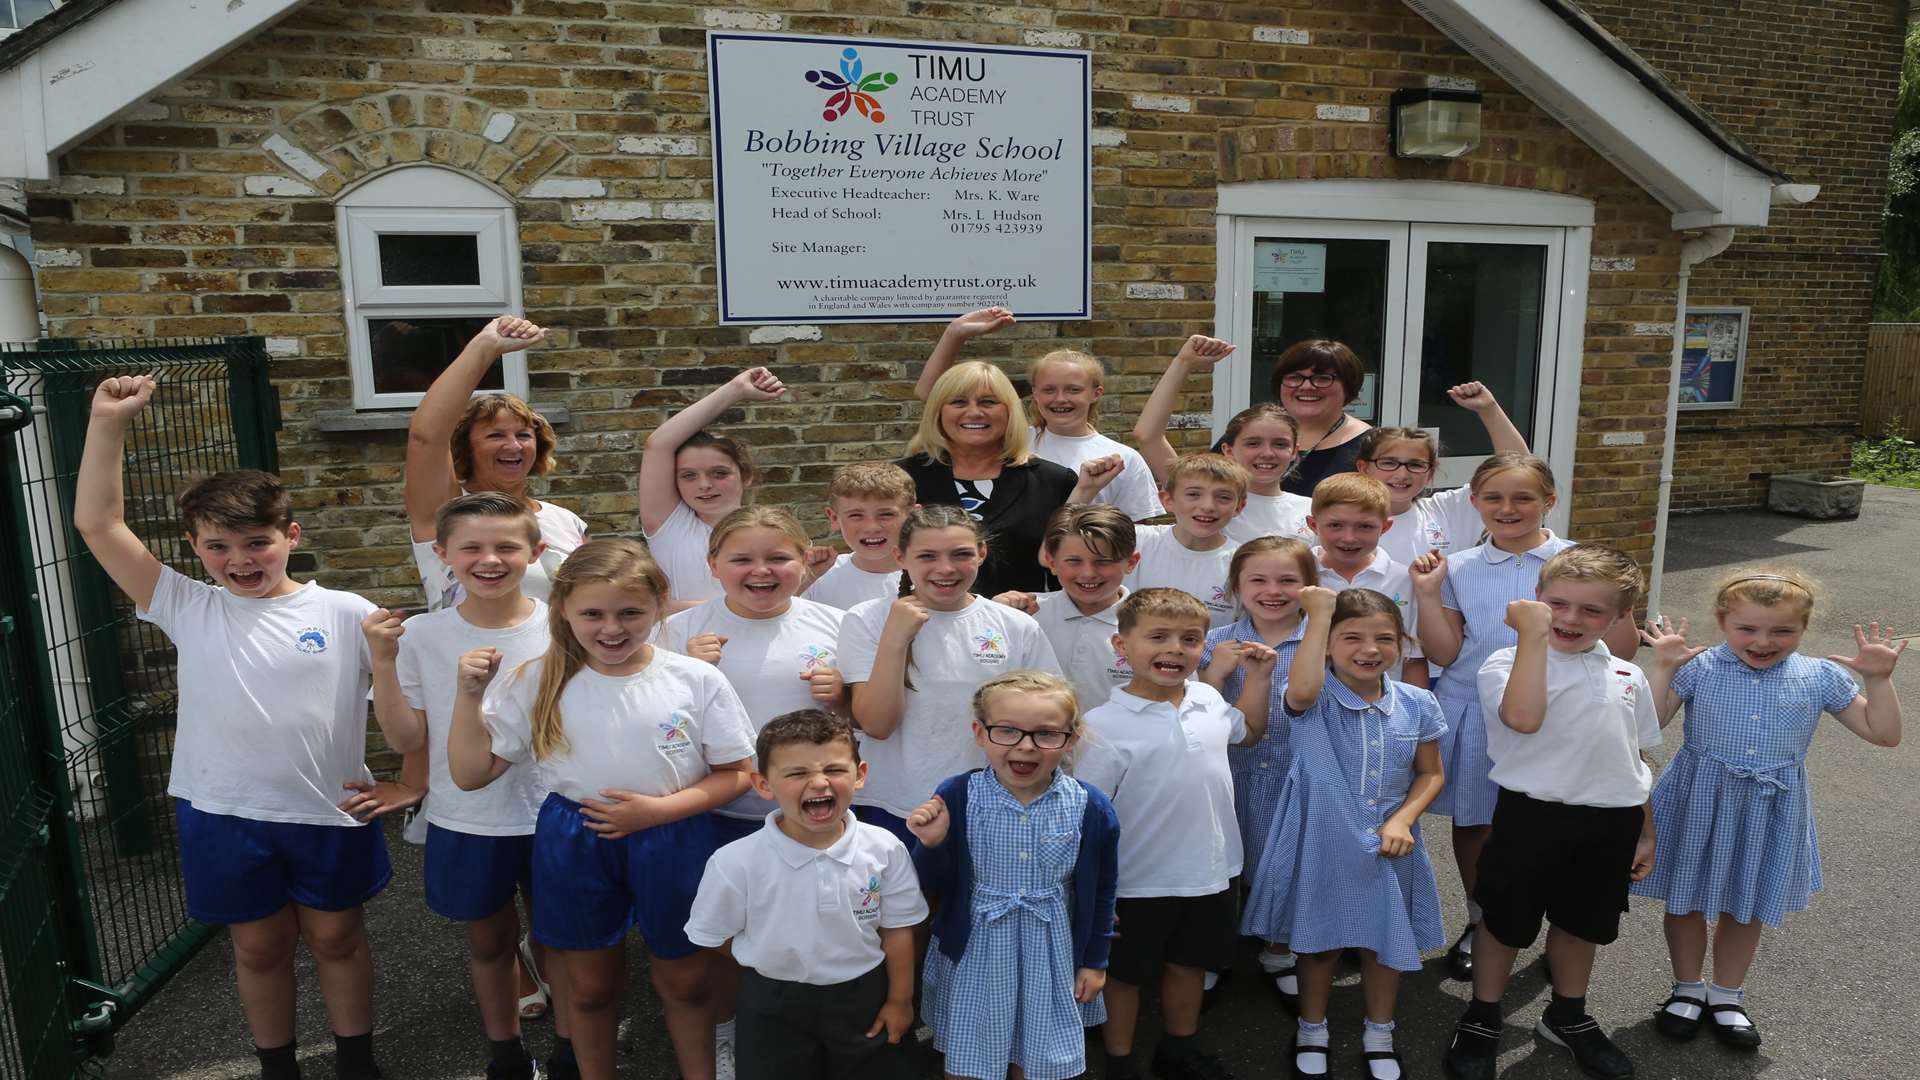 From left, Mrs Ware, Executive Principal, Mrs Hudson, Principal and Mrs Stewart, Assistant Head celebrate with some of the children from Bobbing Village School.